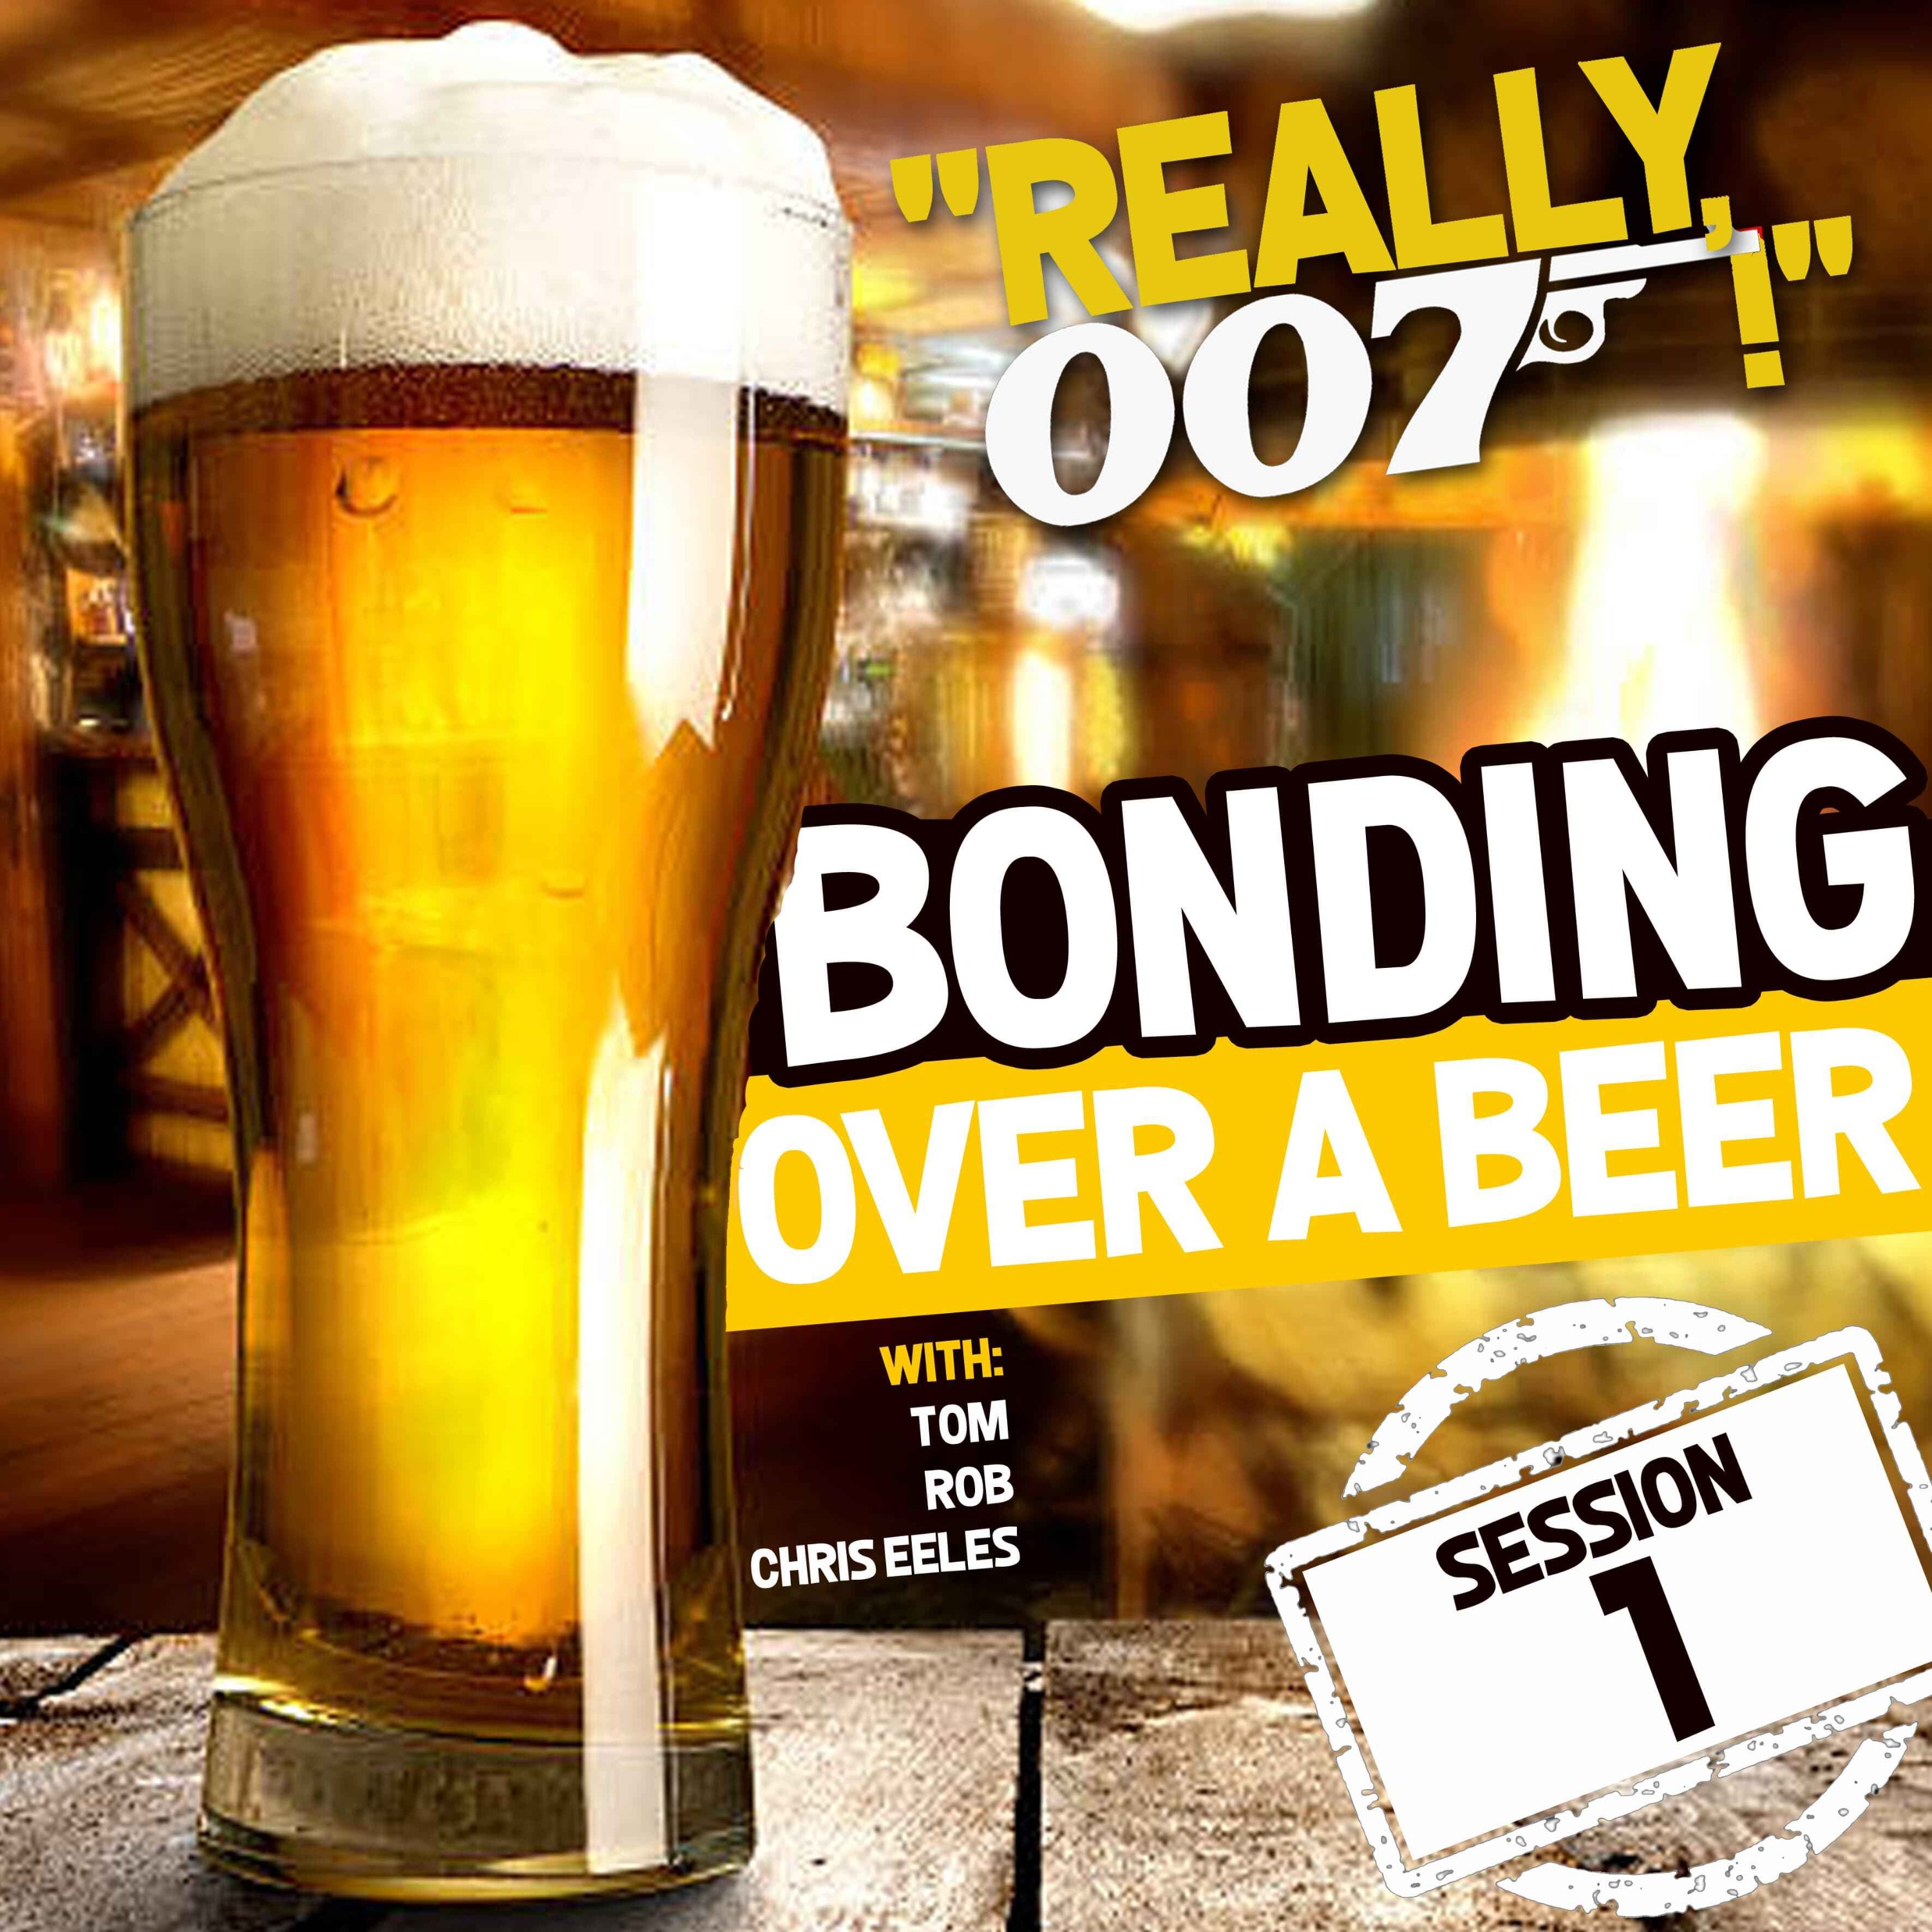 cover art for Bonding over a beer - session 1